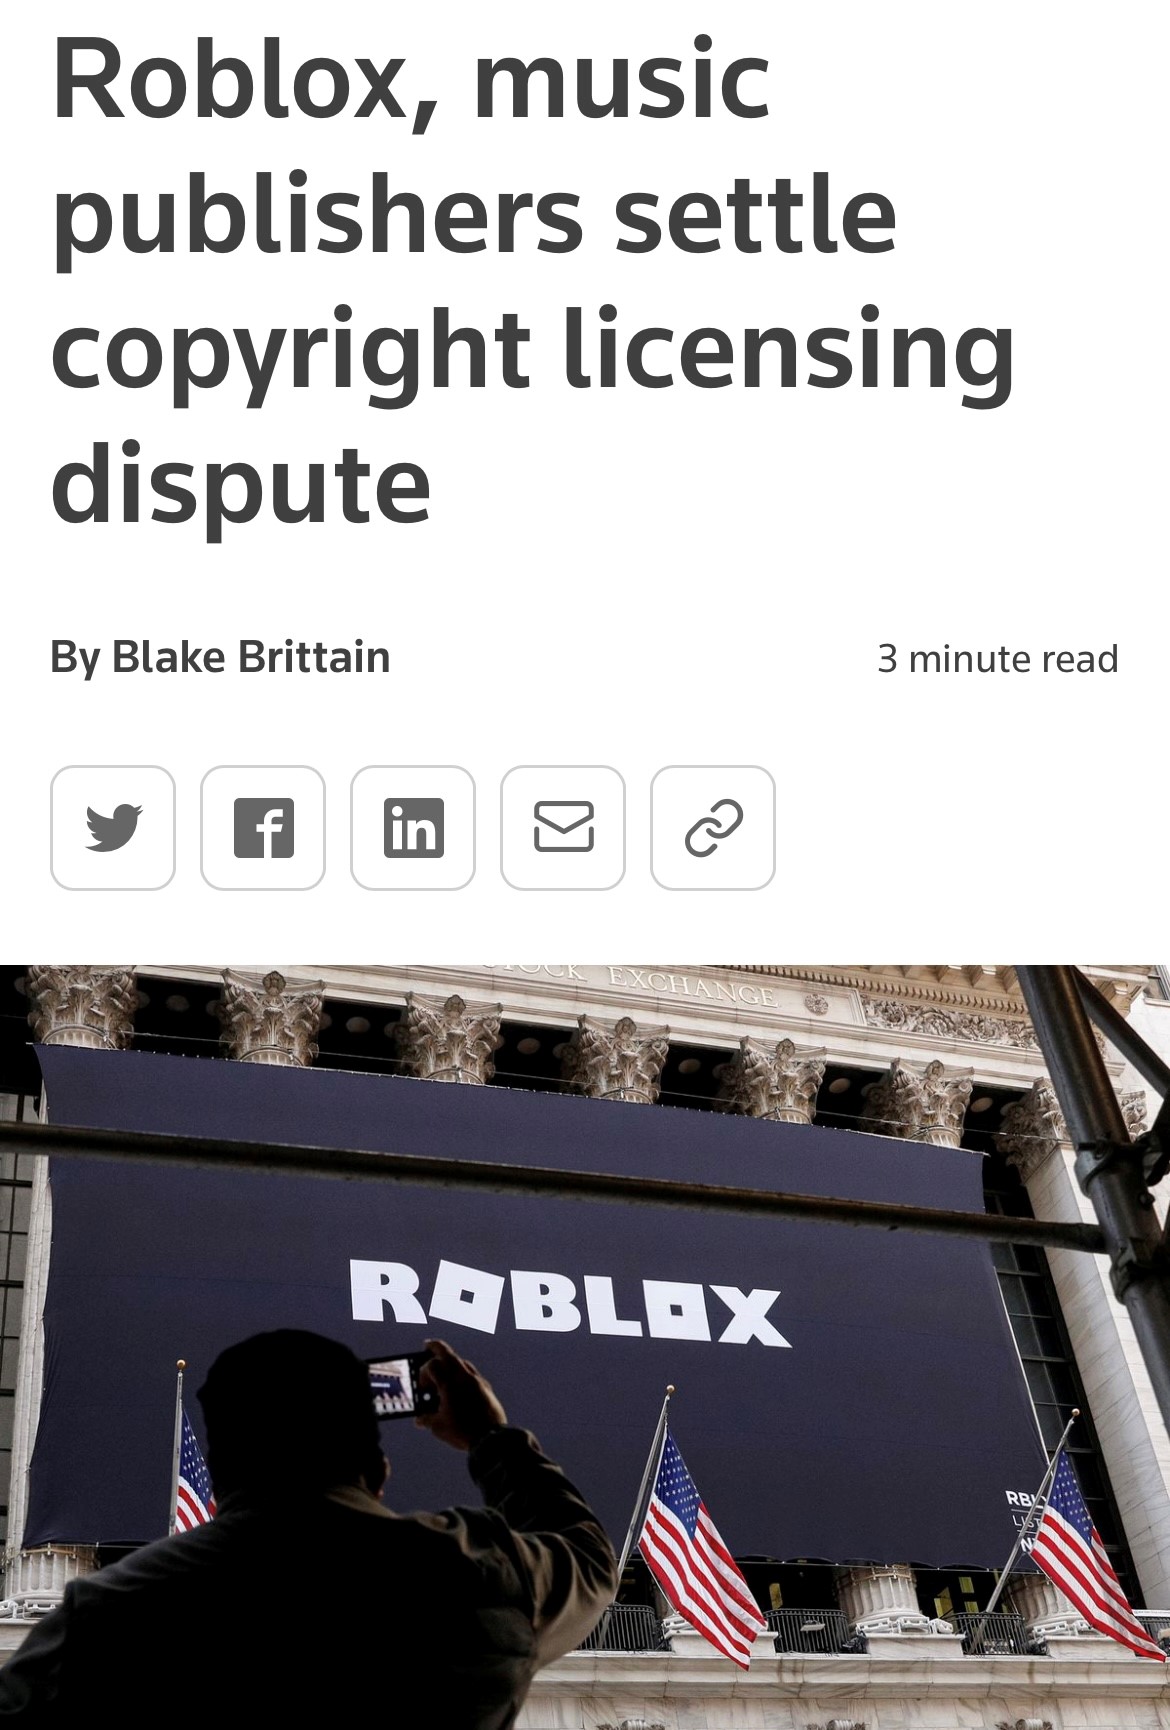 NMPA and Roblox Settle Copyright Suit, Launch Music Licensing Talks